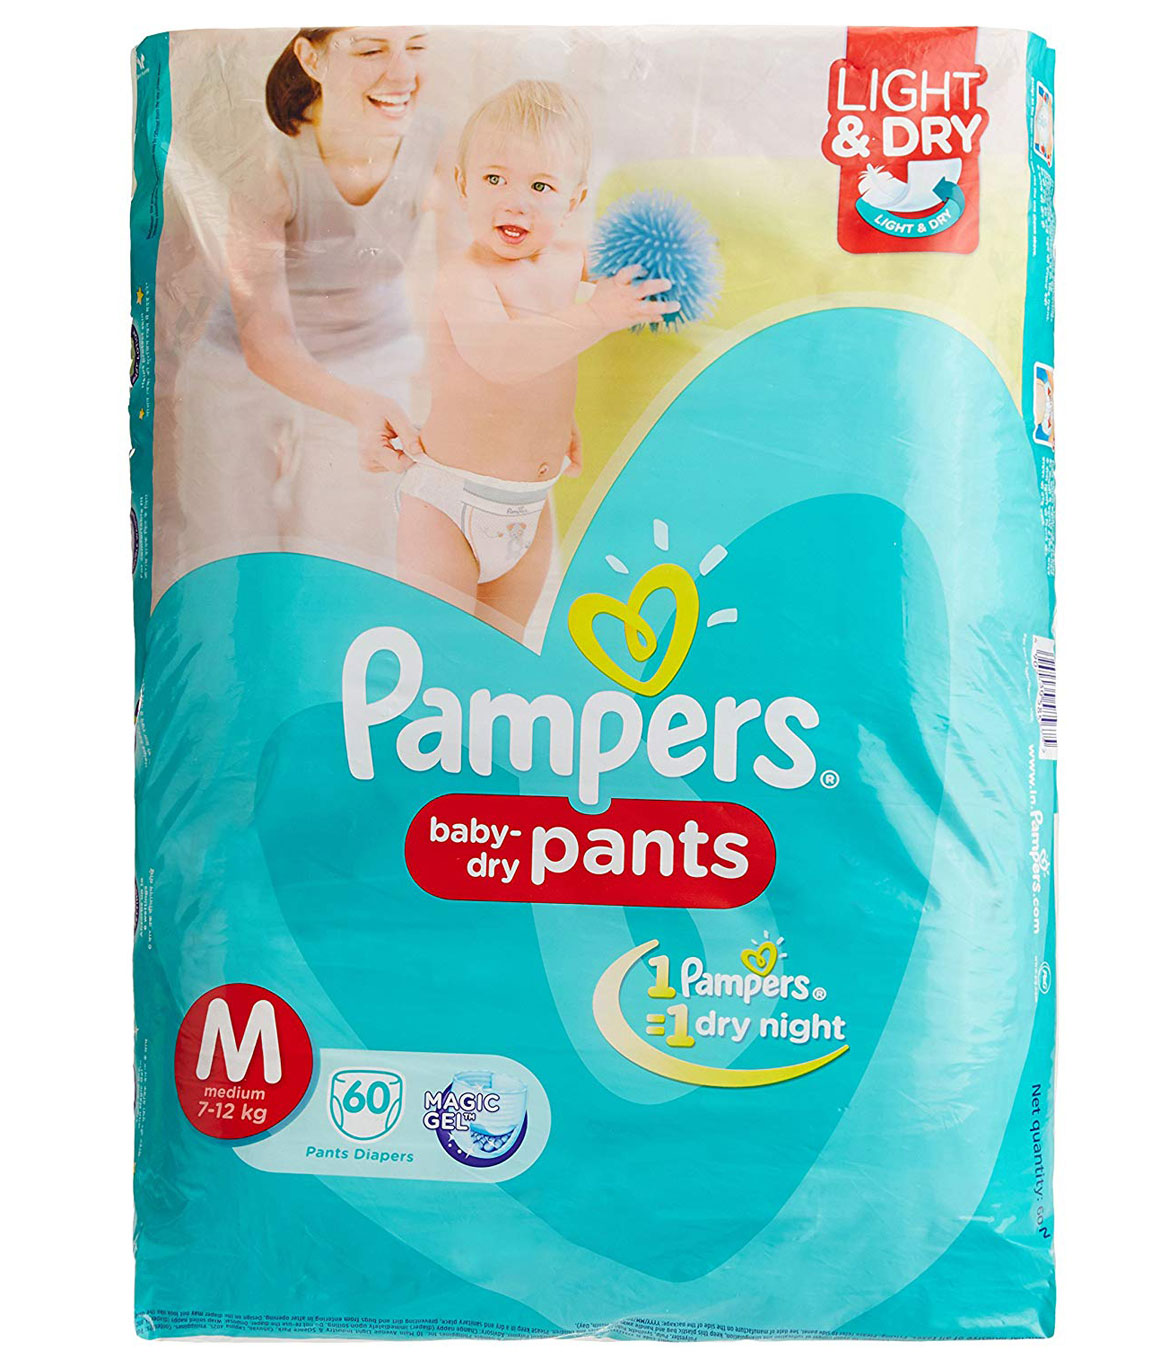 Buy LITTLE ANGEL EXTRA DRY BABY DIAPER PANTS WITH WETNESS INDICATOR, LARGE ( L) SIZE, 34 COUNT, 8-14 KG Online & Get Upto 60% OFF at PharmEasy